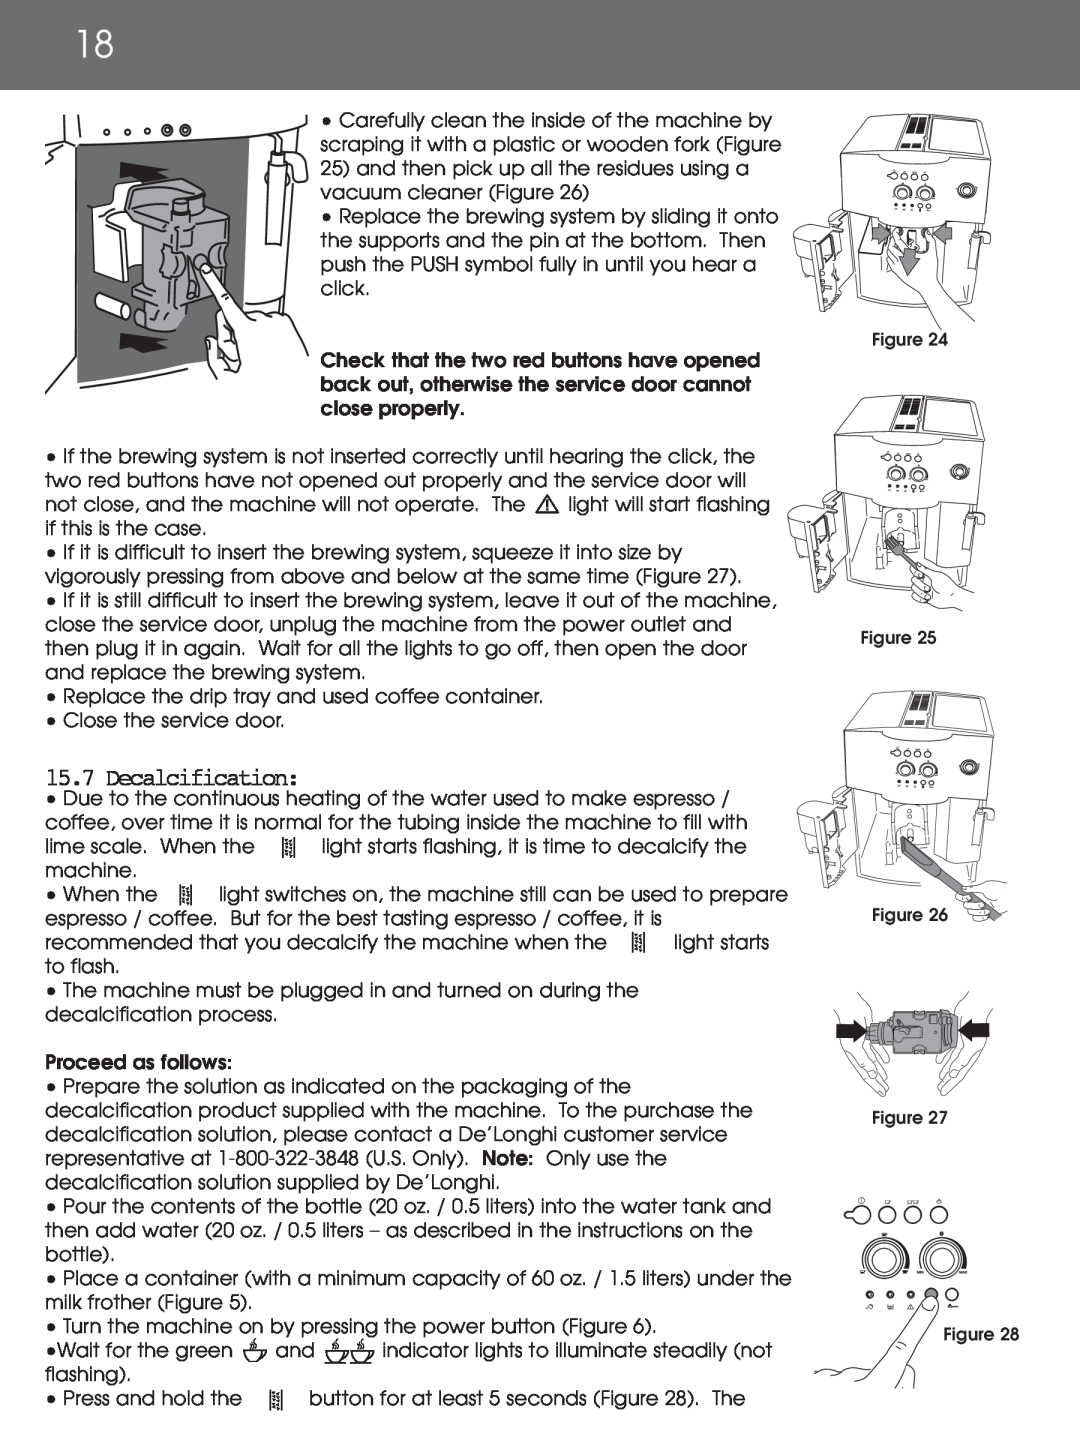 DeLonghi EAM4000 instruction manual Decalcification 